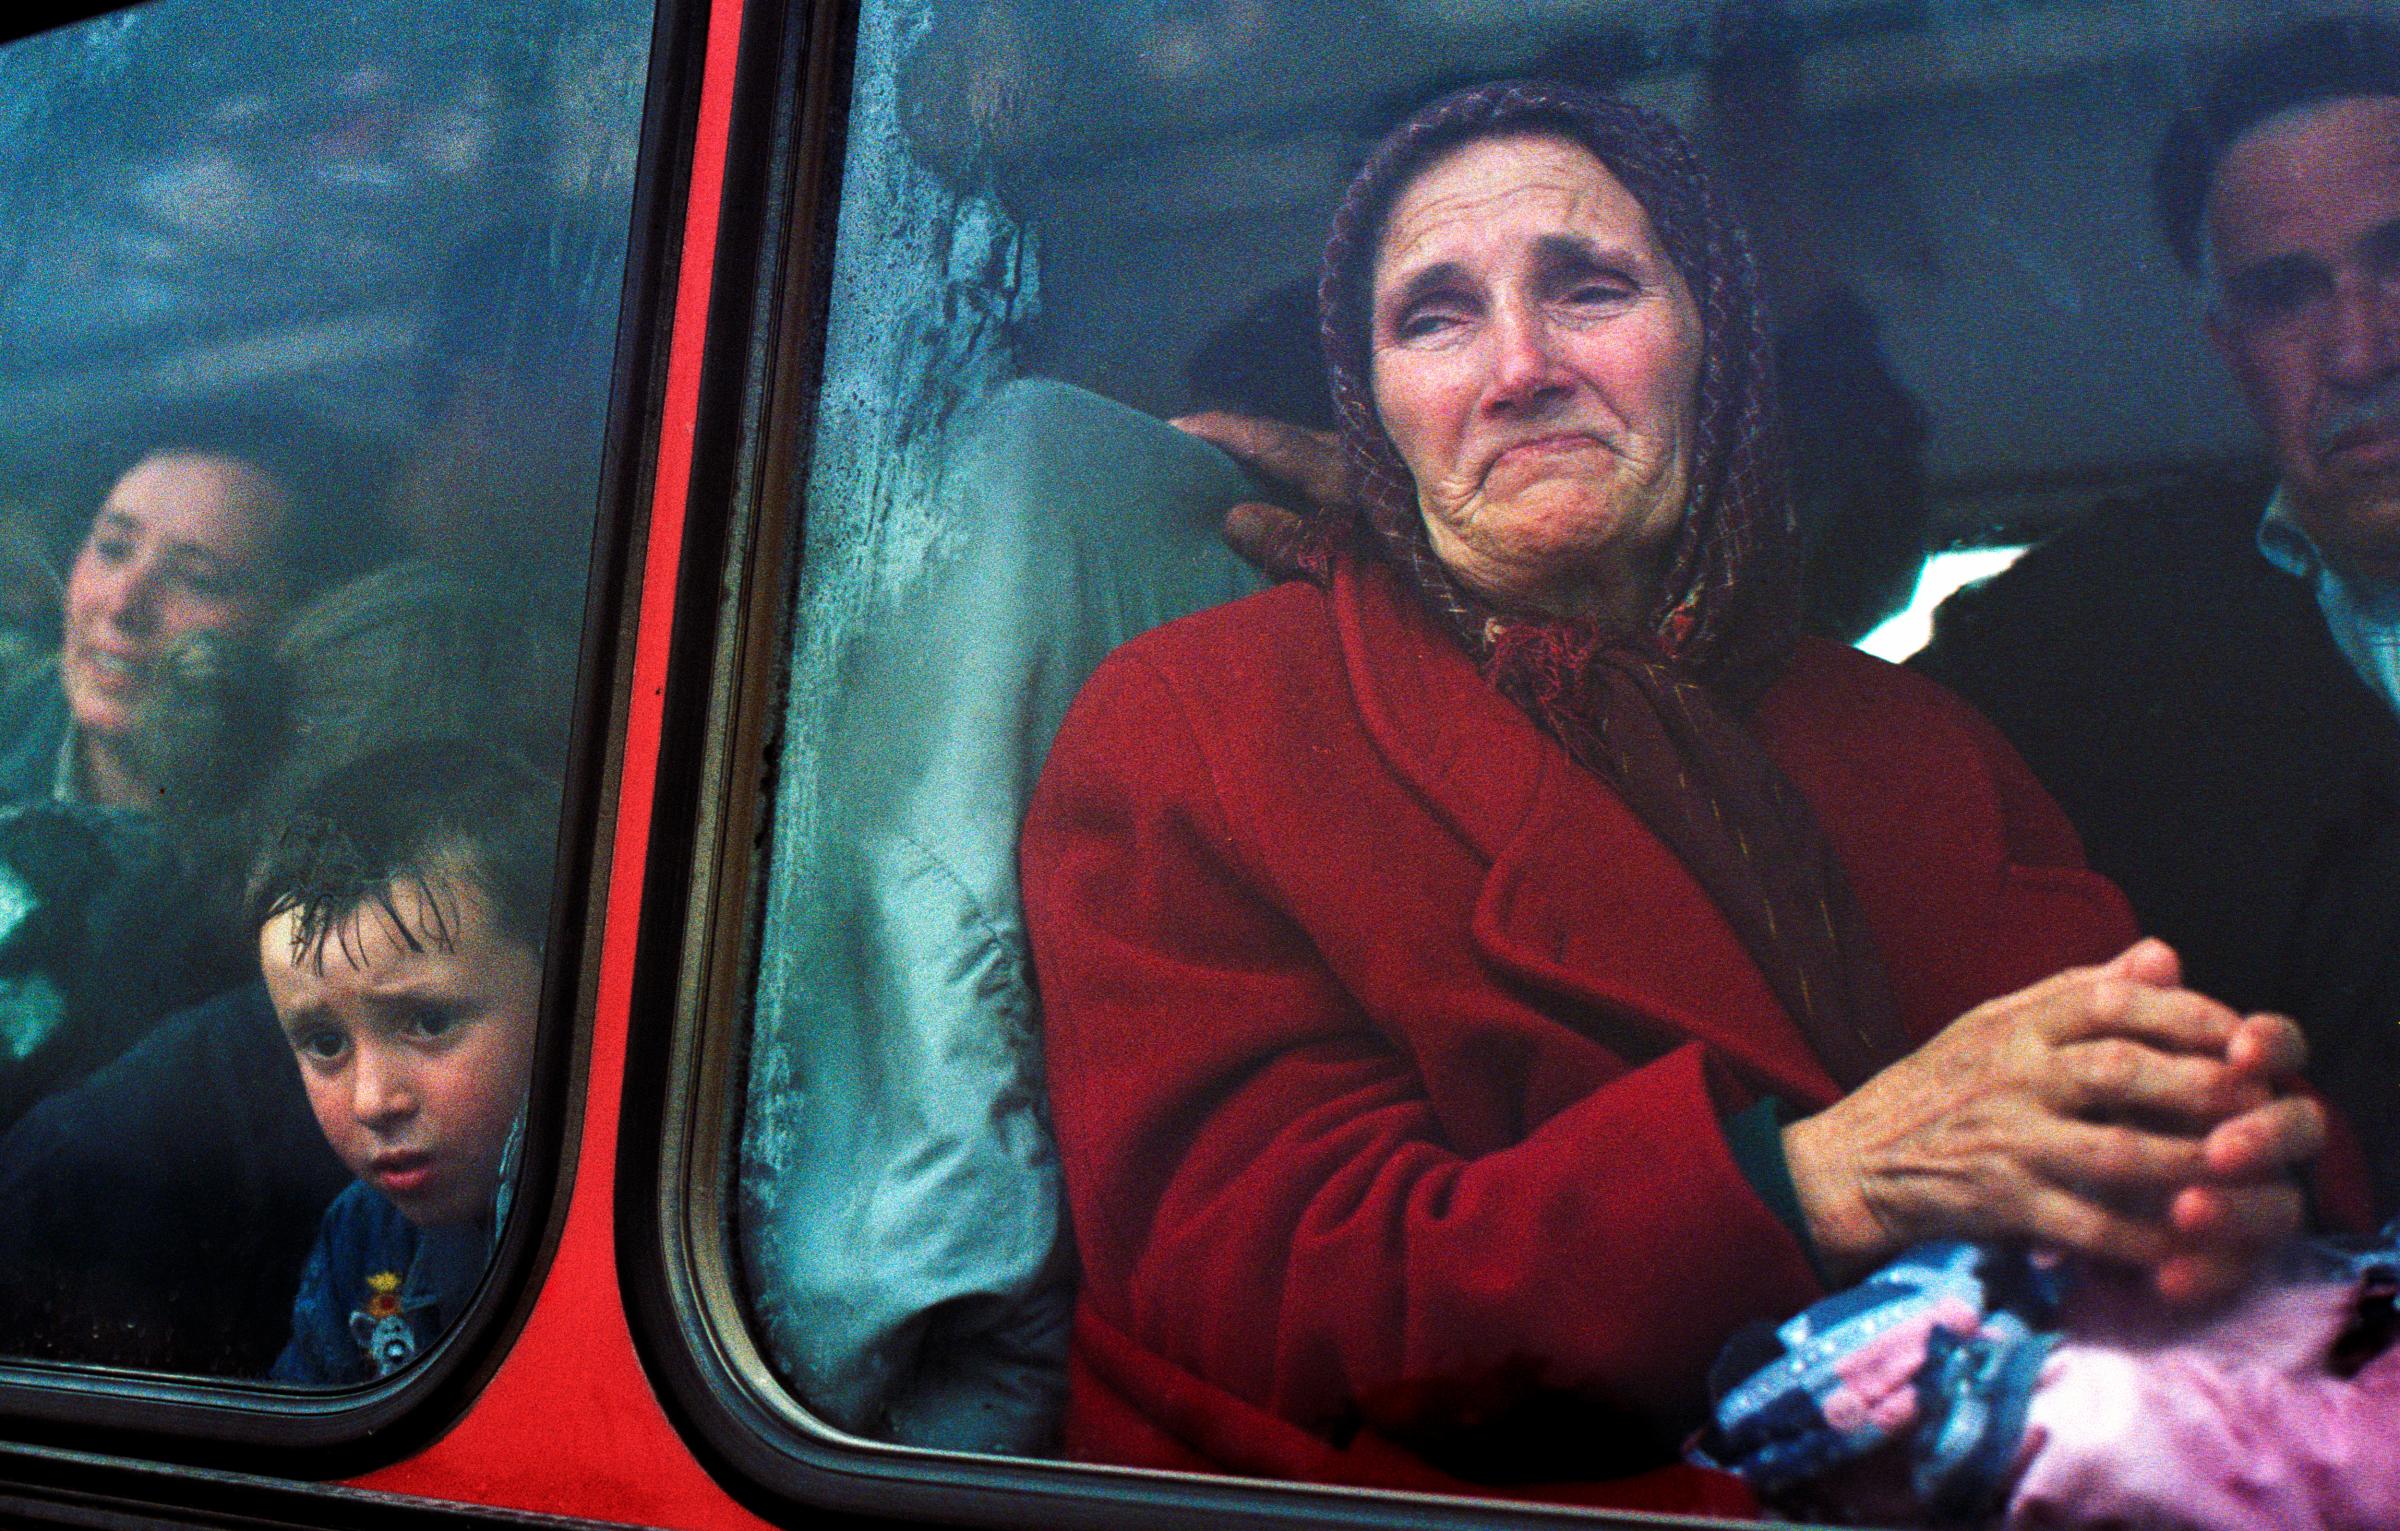 Flight From Kosovo - As the NATO bombing campaign persisted, refugees...